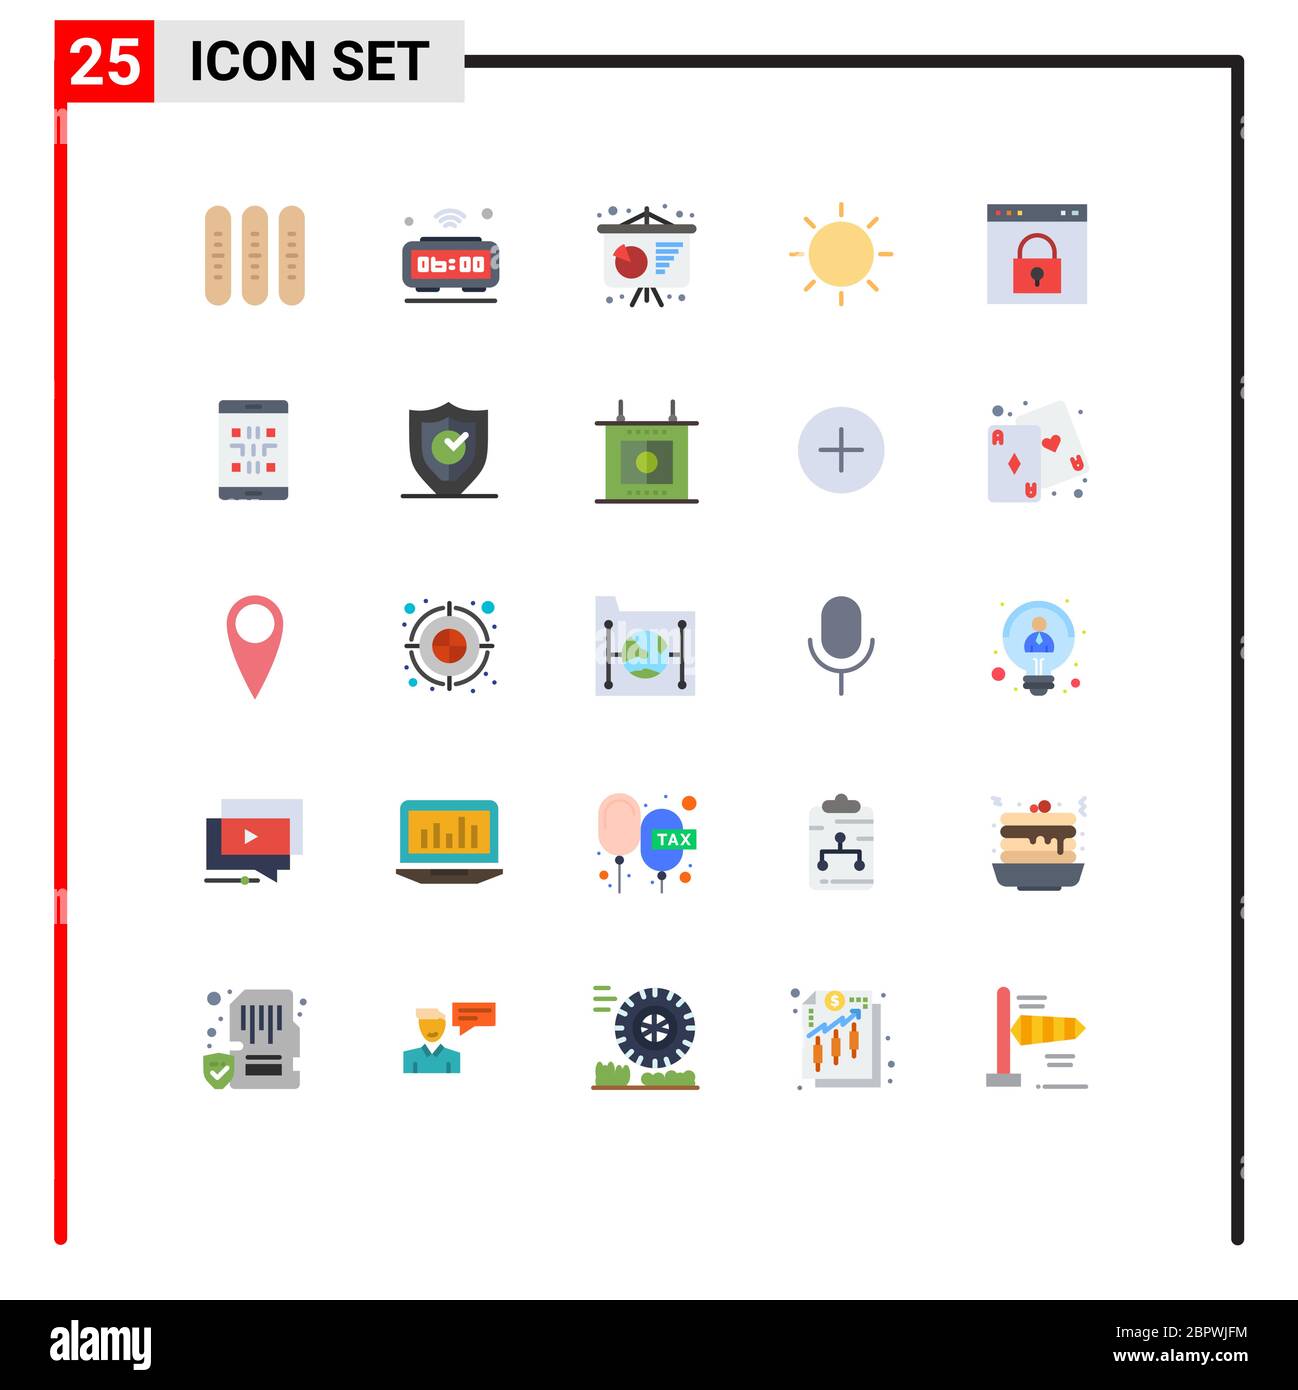 Flat Color Pack of 25 Universal Symbols of tool, layout, iot, interface ...